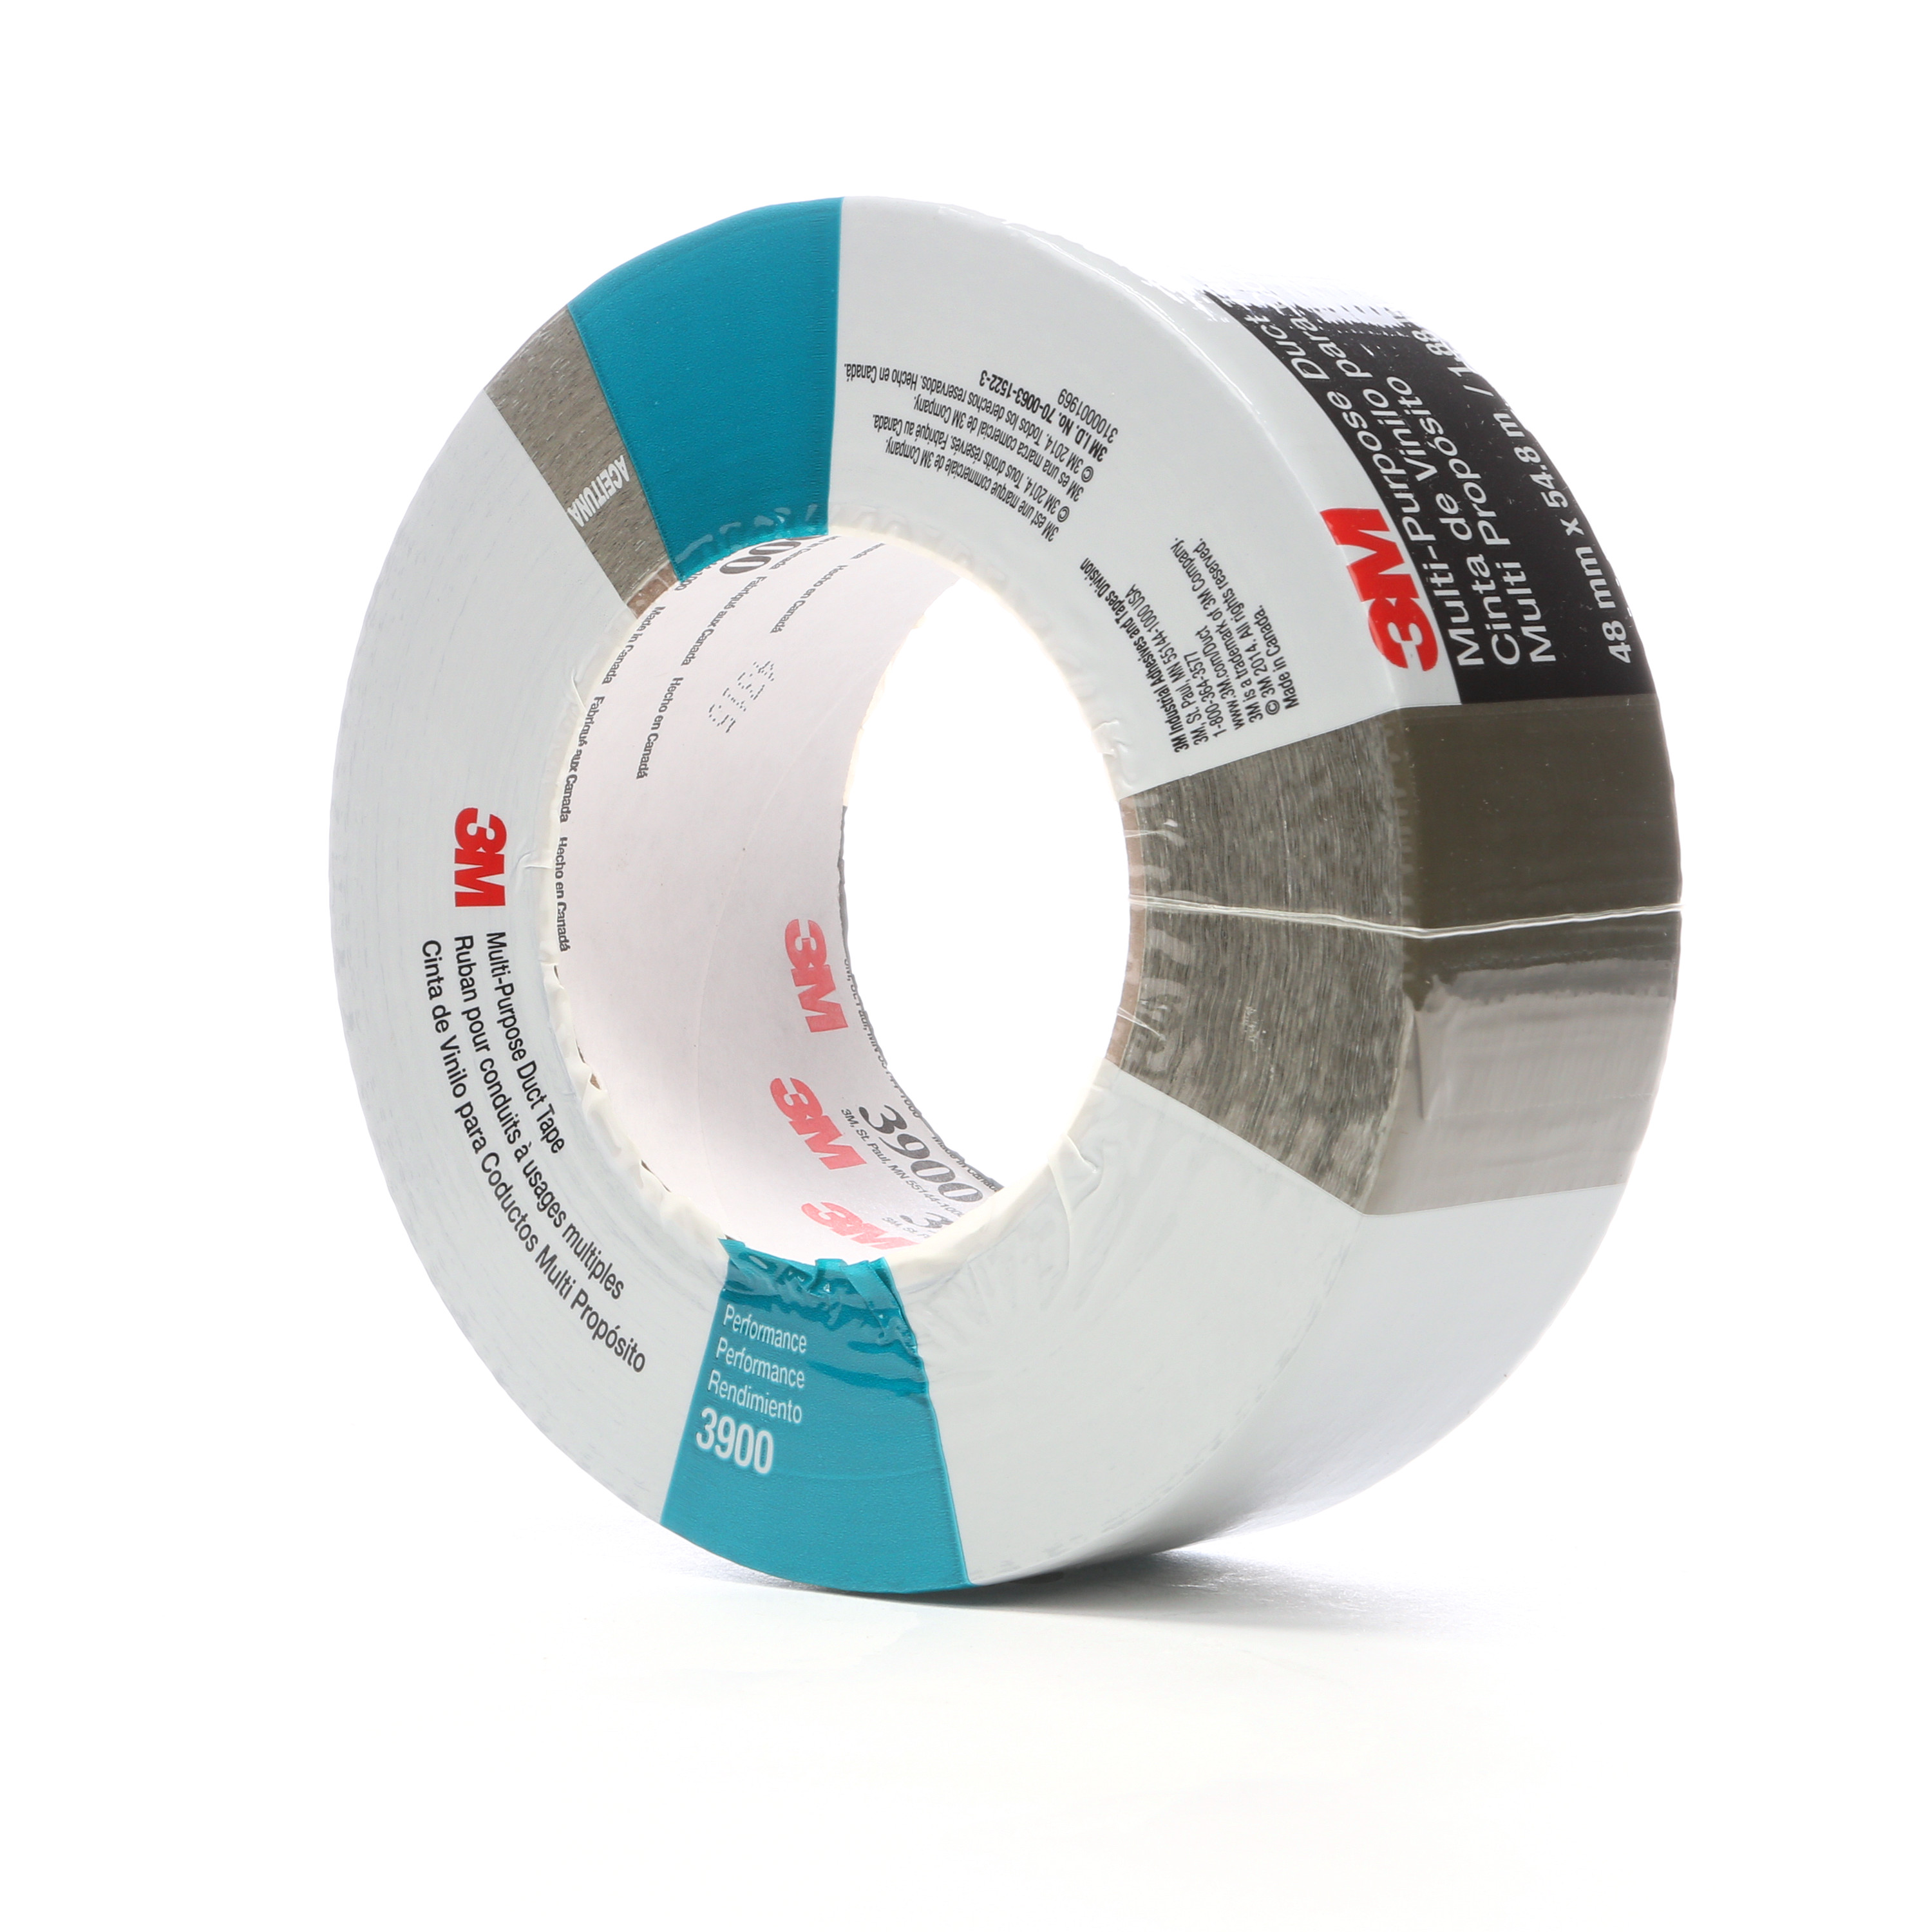 3M™ Multi-Purpose Duct Tape 3900, Olive, 48 mm x 54.8 m, 8.1 mil, 24 per
case, Individually Wrapped Conveniently Packaged